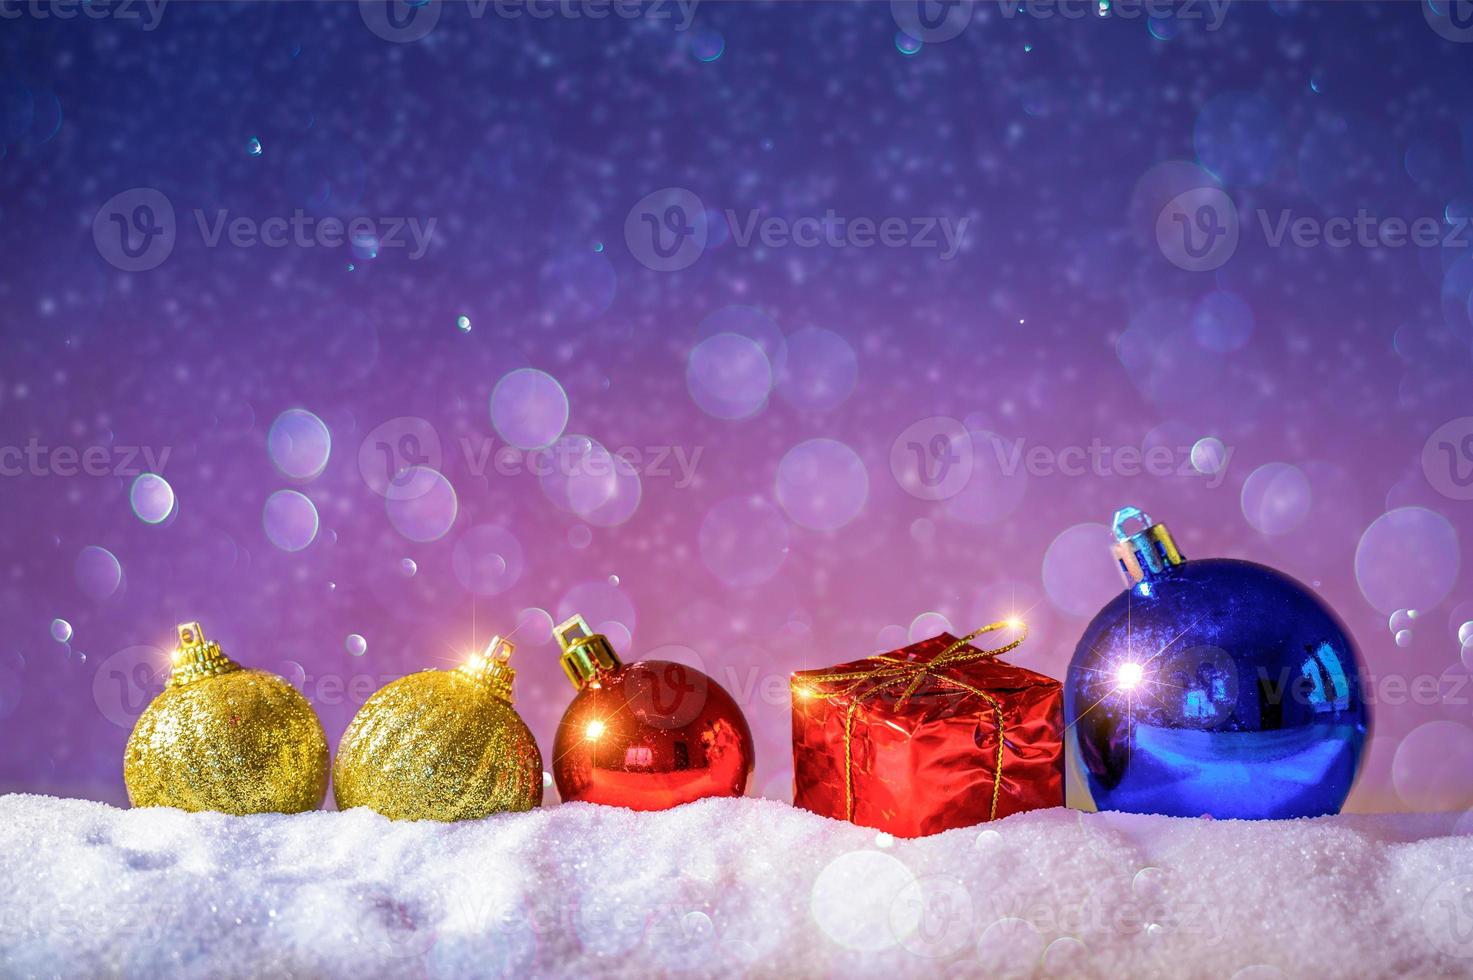 Merry christmas and happy new year greeting background. Christmas Lantern On Snow With Fir photo